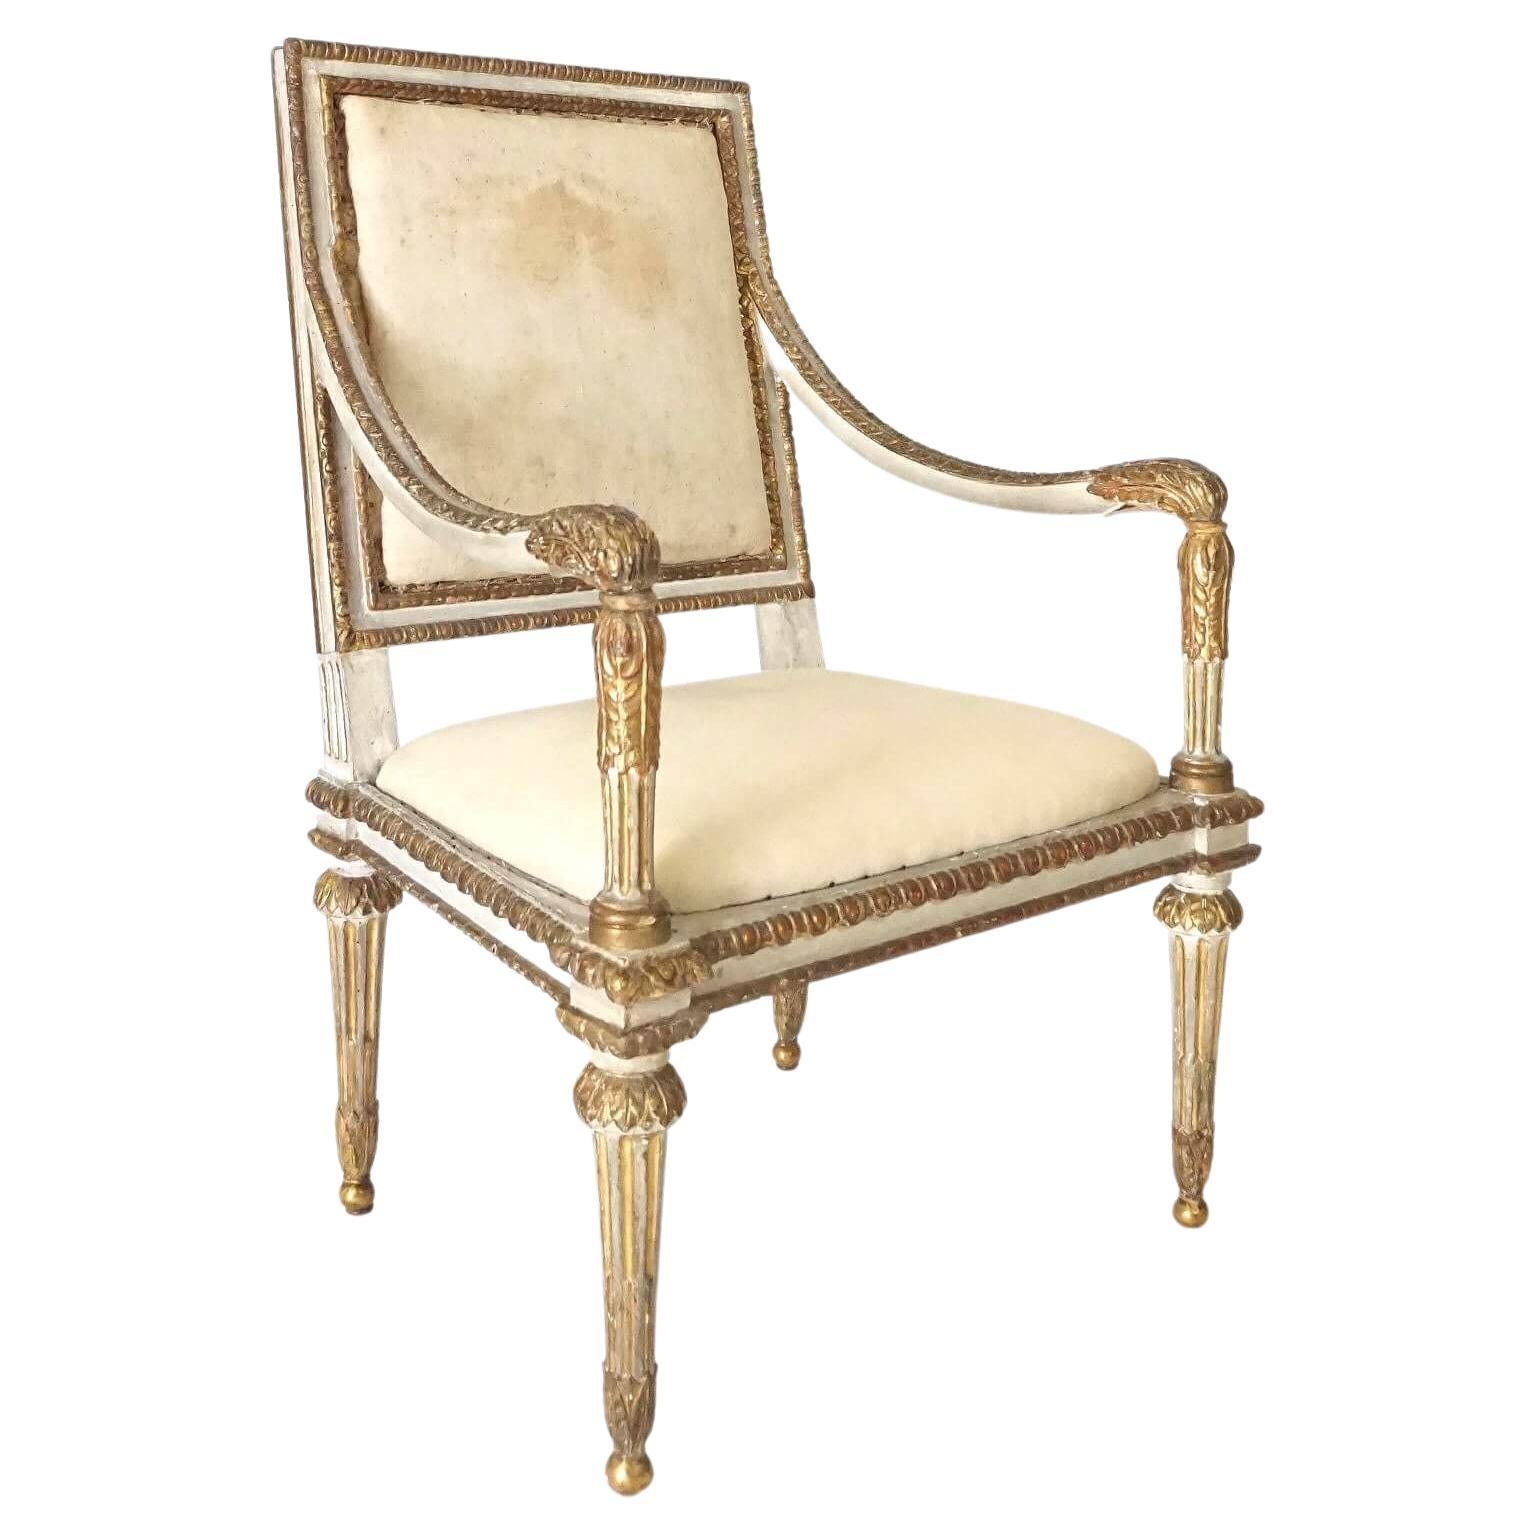 Italian Louis XVI Painted and Parcel Gilt Fauteuil of Large Scale, circa 1780 For Sale